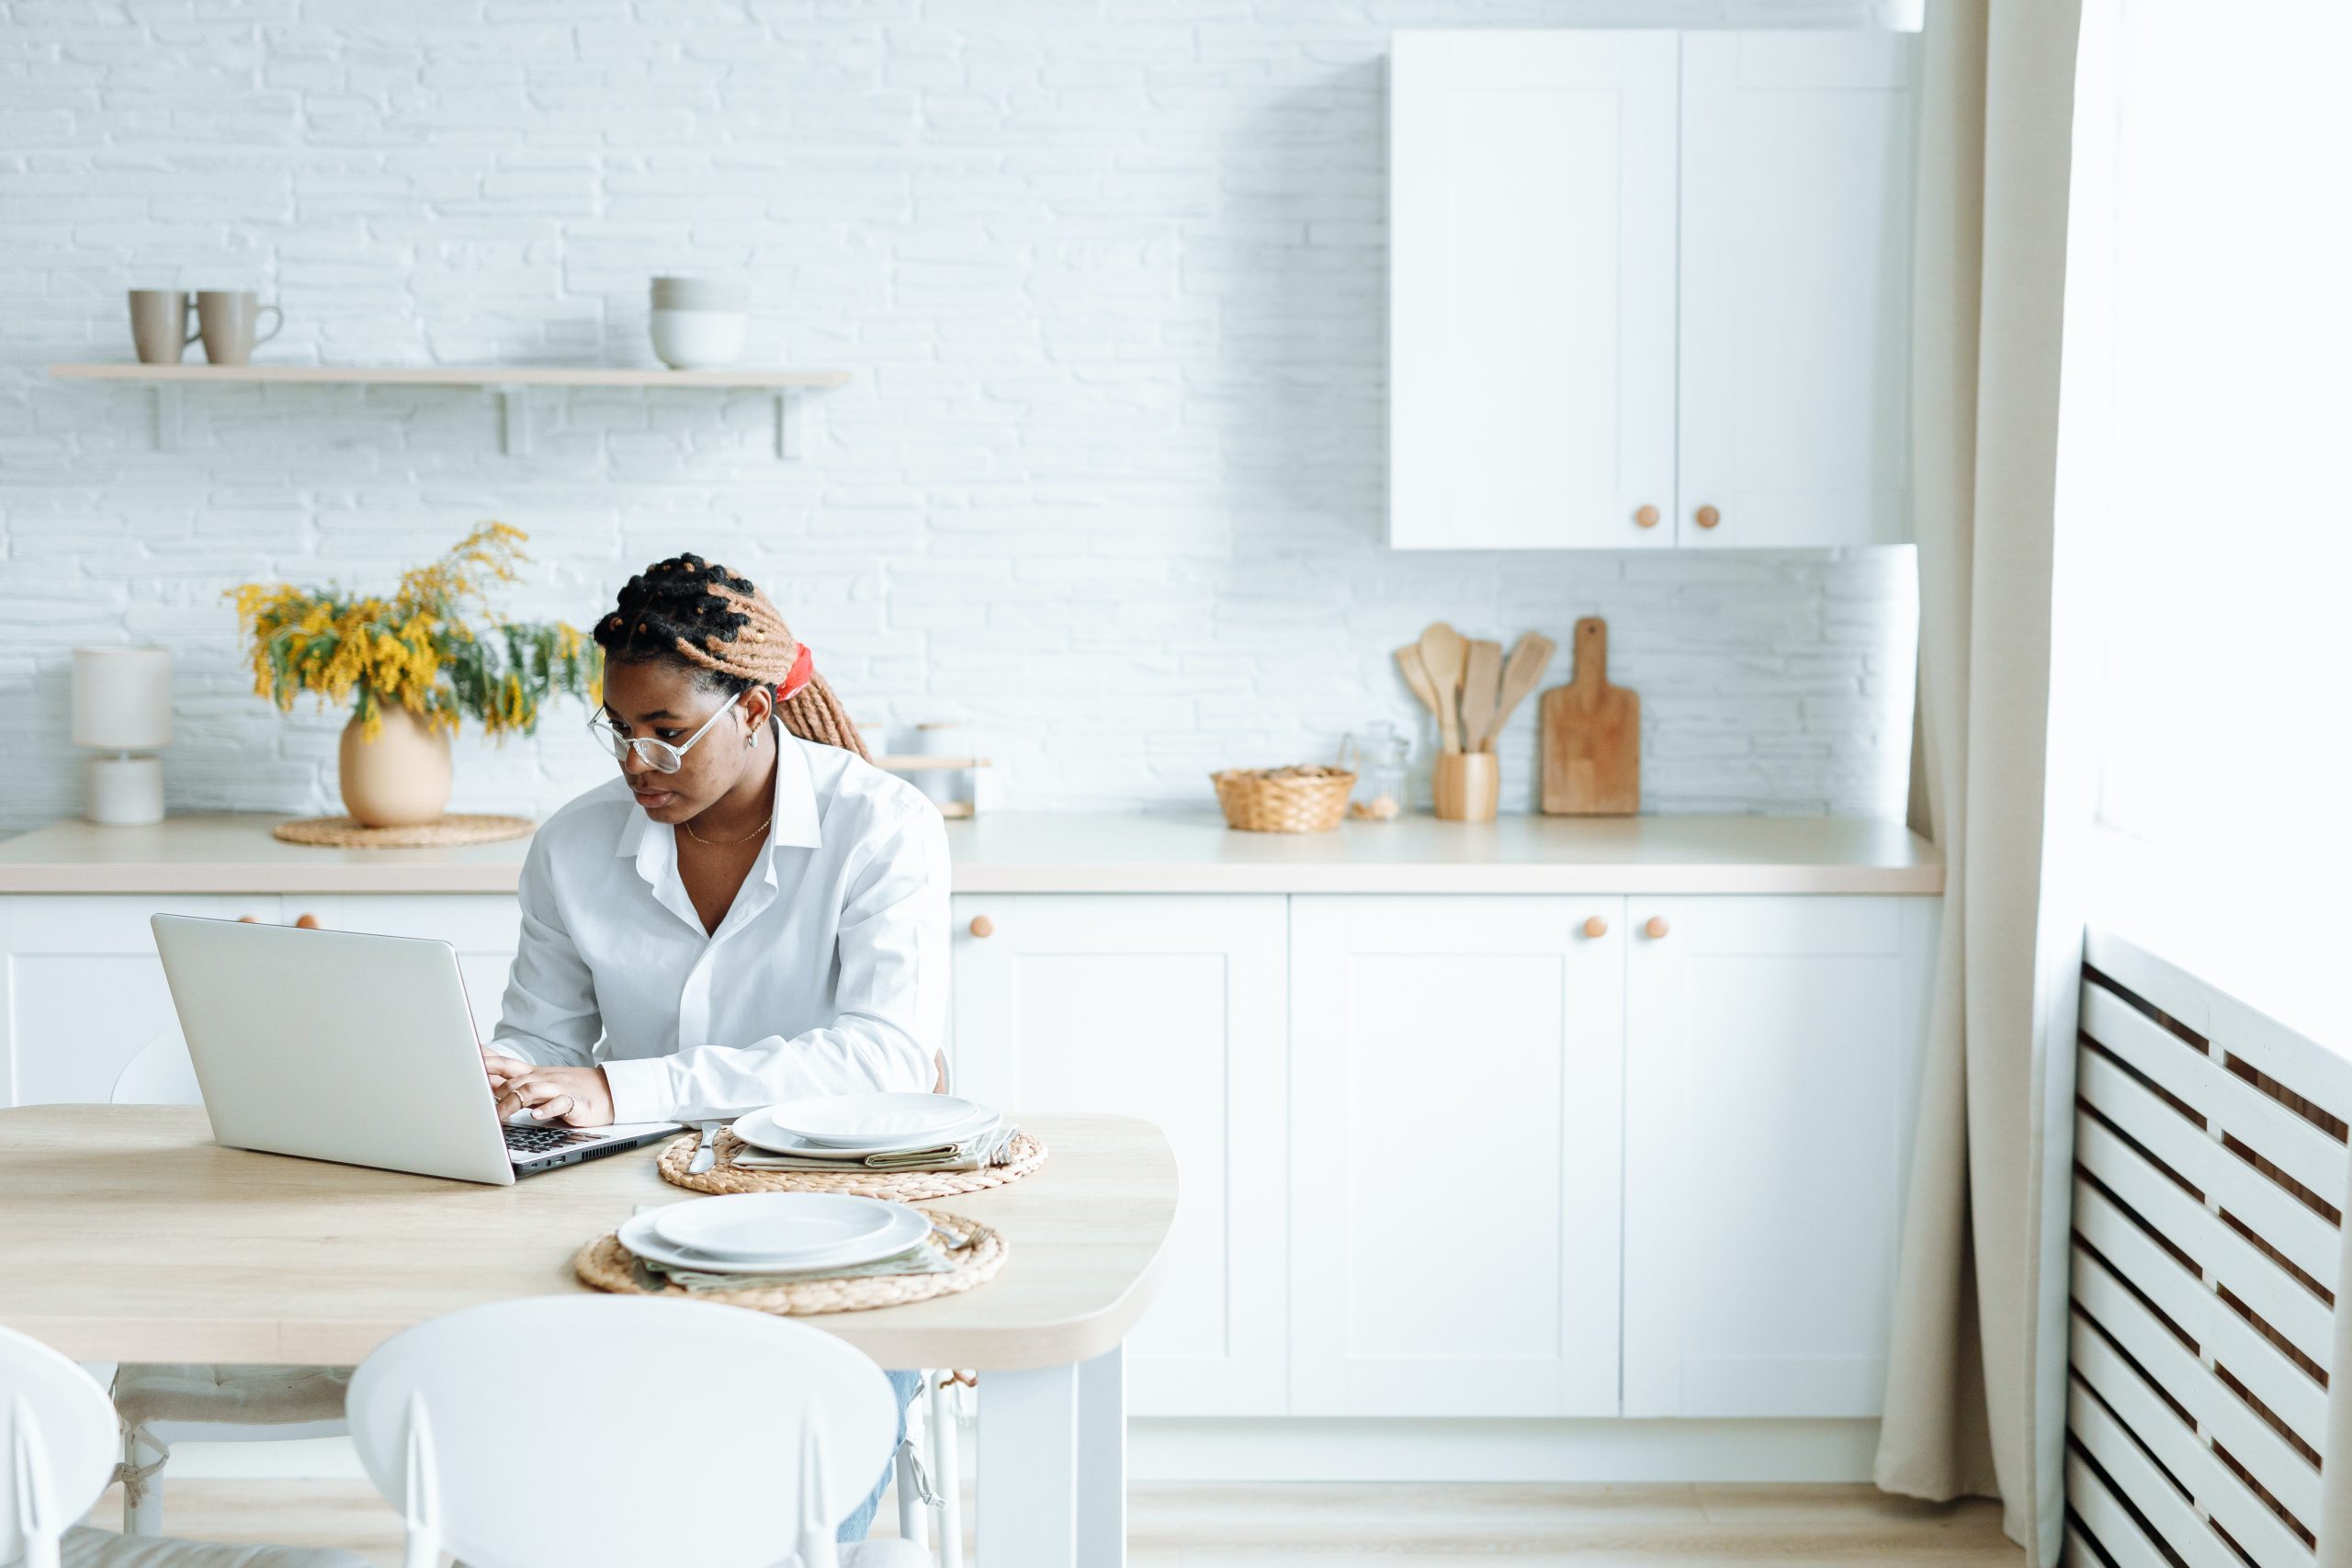 https://www.pexels.com/photo/woman-typing-on-a-laptop-while-in-the-kitchen-7236625